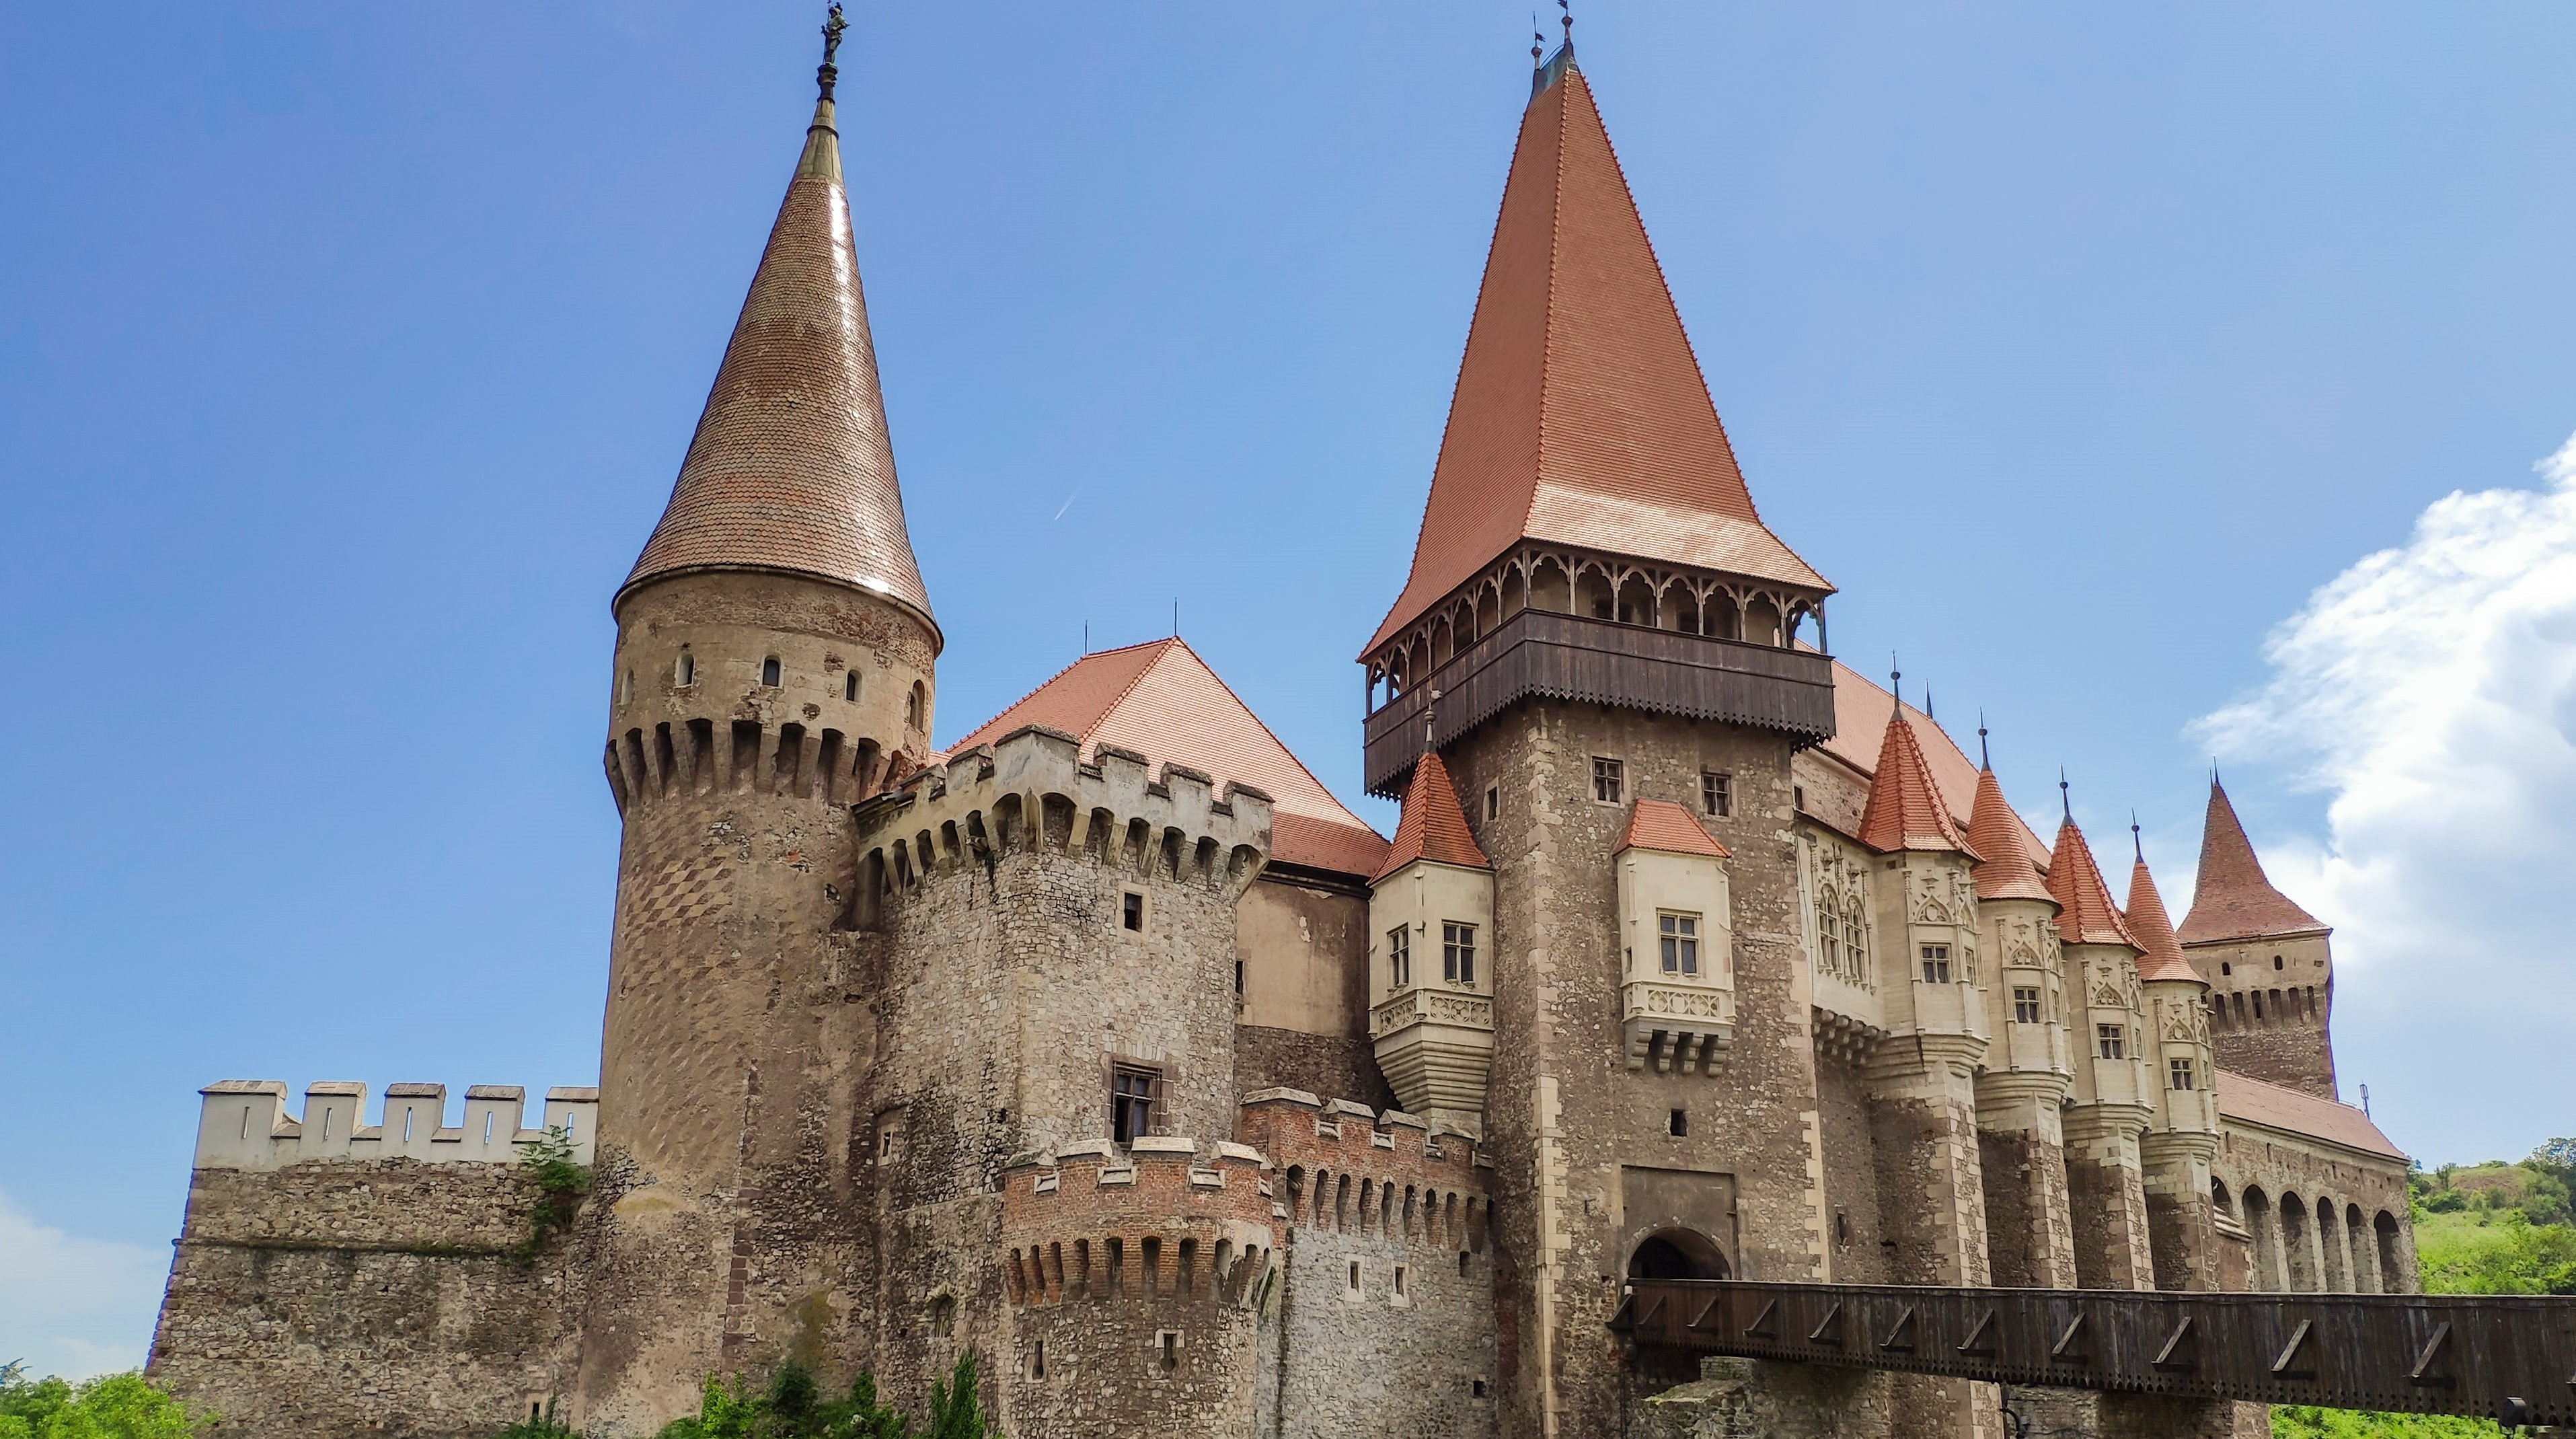 ROMANIA'S CASTLES: FROM LEGENDARY DRACULA'S TO FAIRY TALE